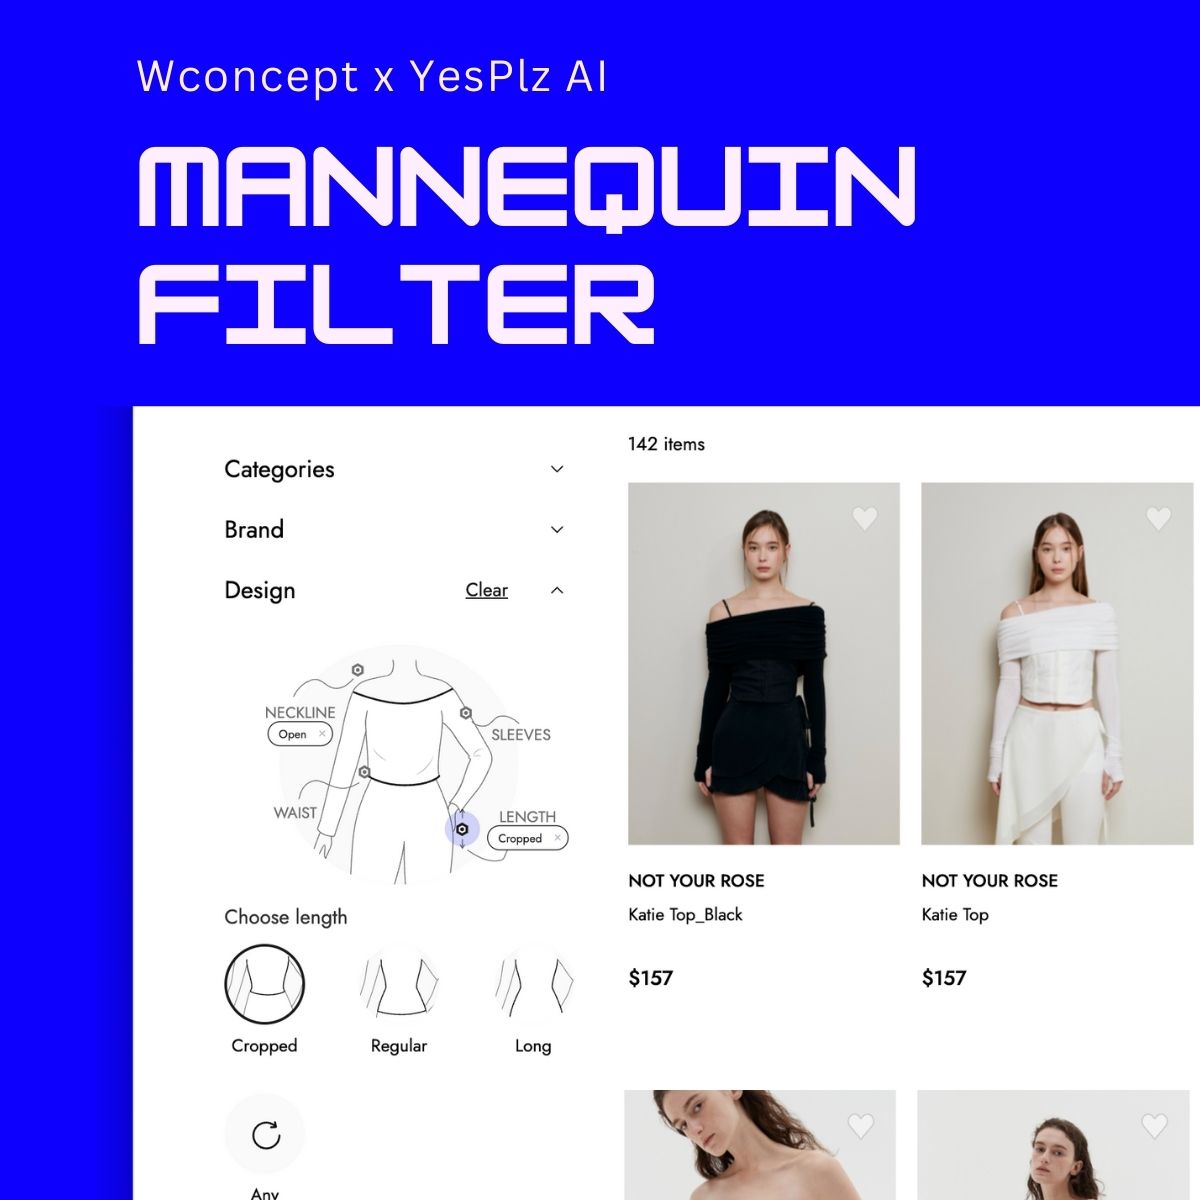 The Virtual Mannequin Filter for Wconcept Renewal Project